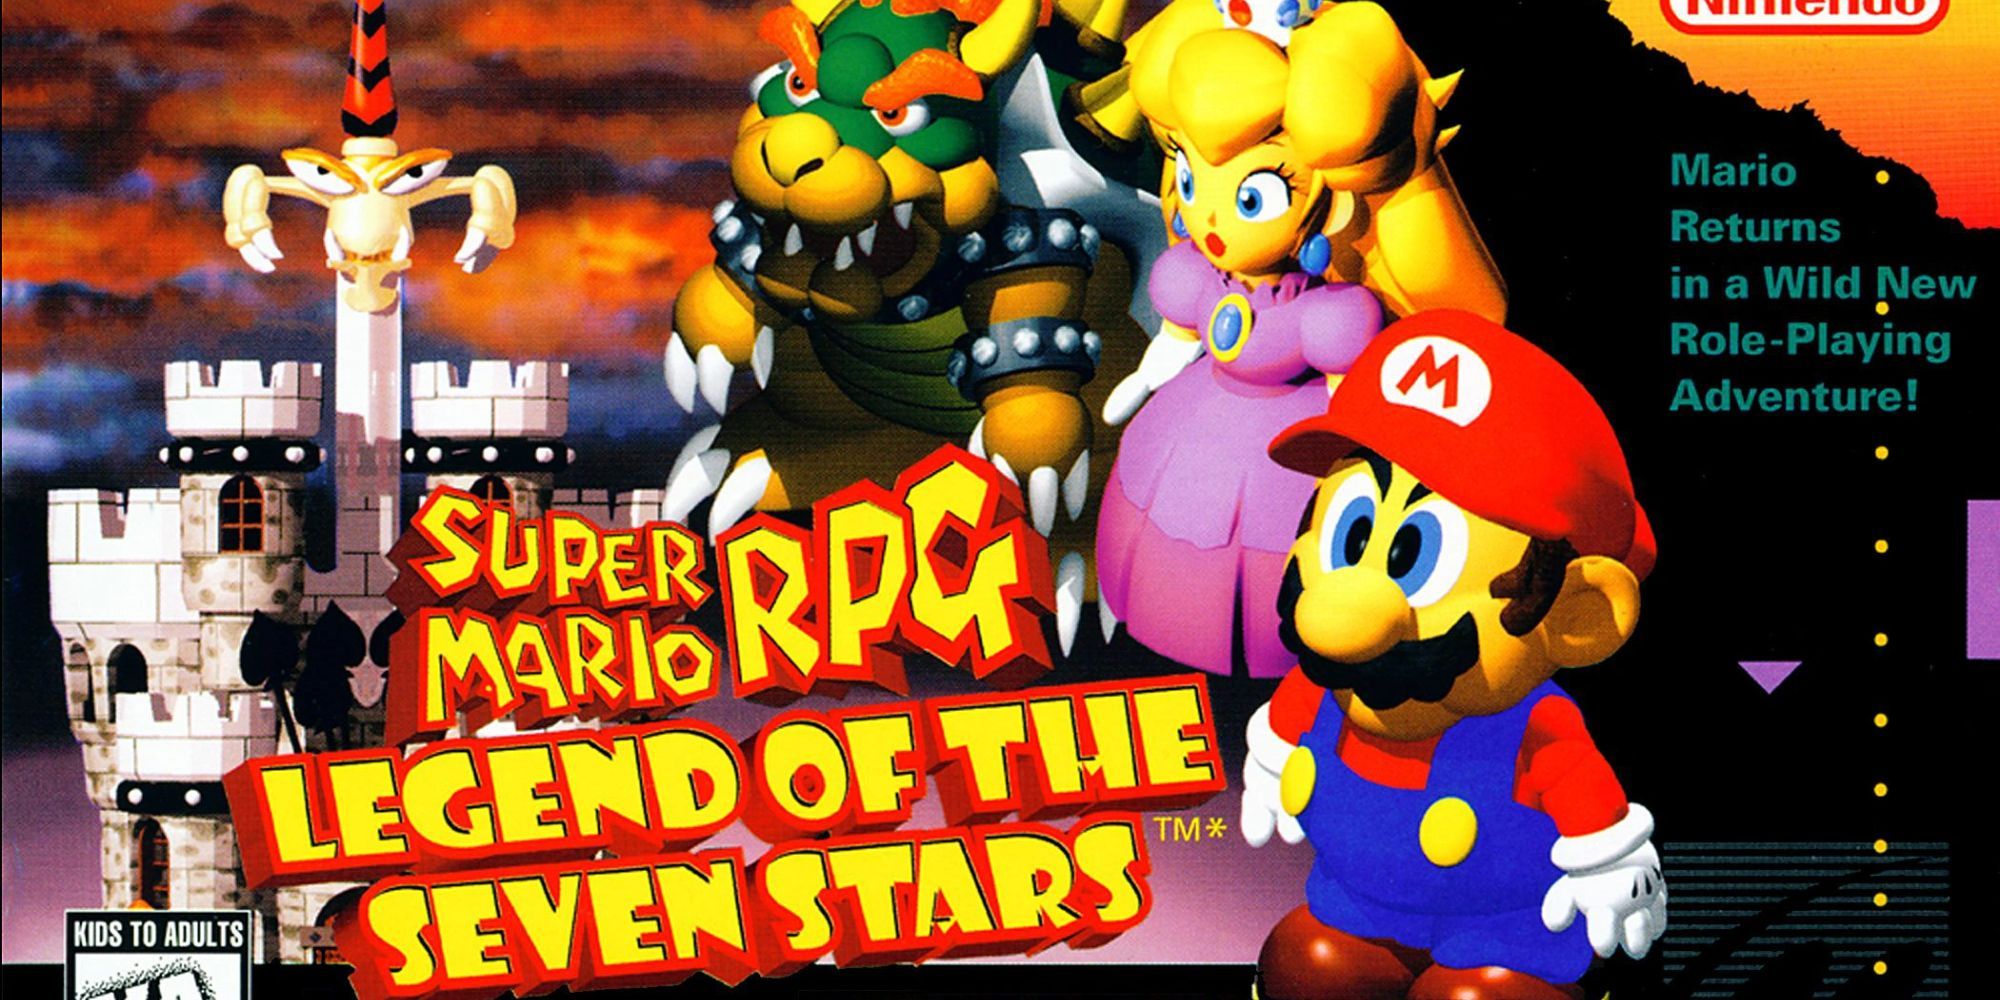 Cover art for Super Mario Legend of the Seven Stars with Mario, Princess Peach and Bowser for the SNES